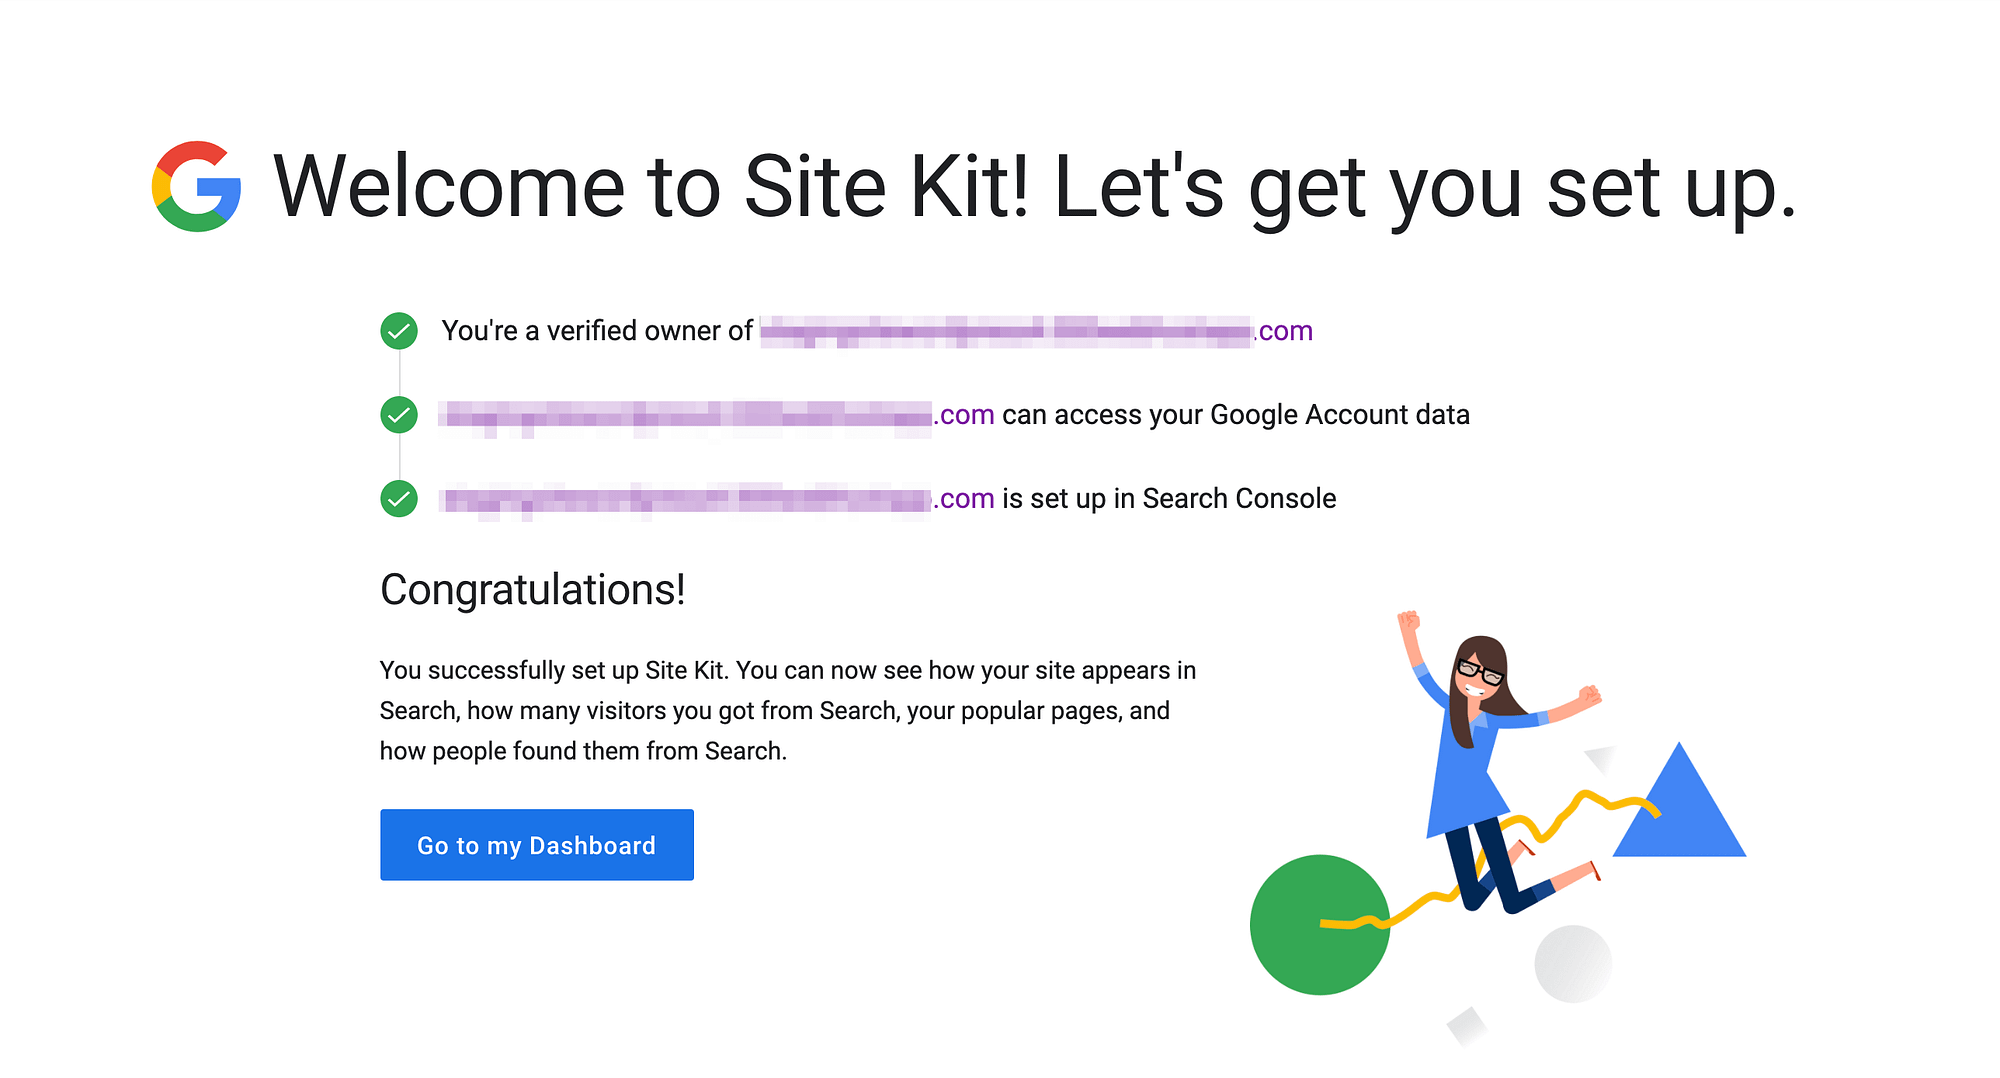 The Google Sit Kit Welcome message.